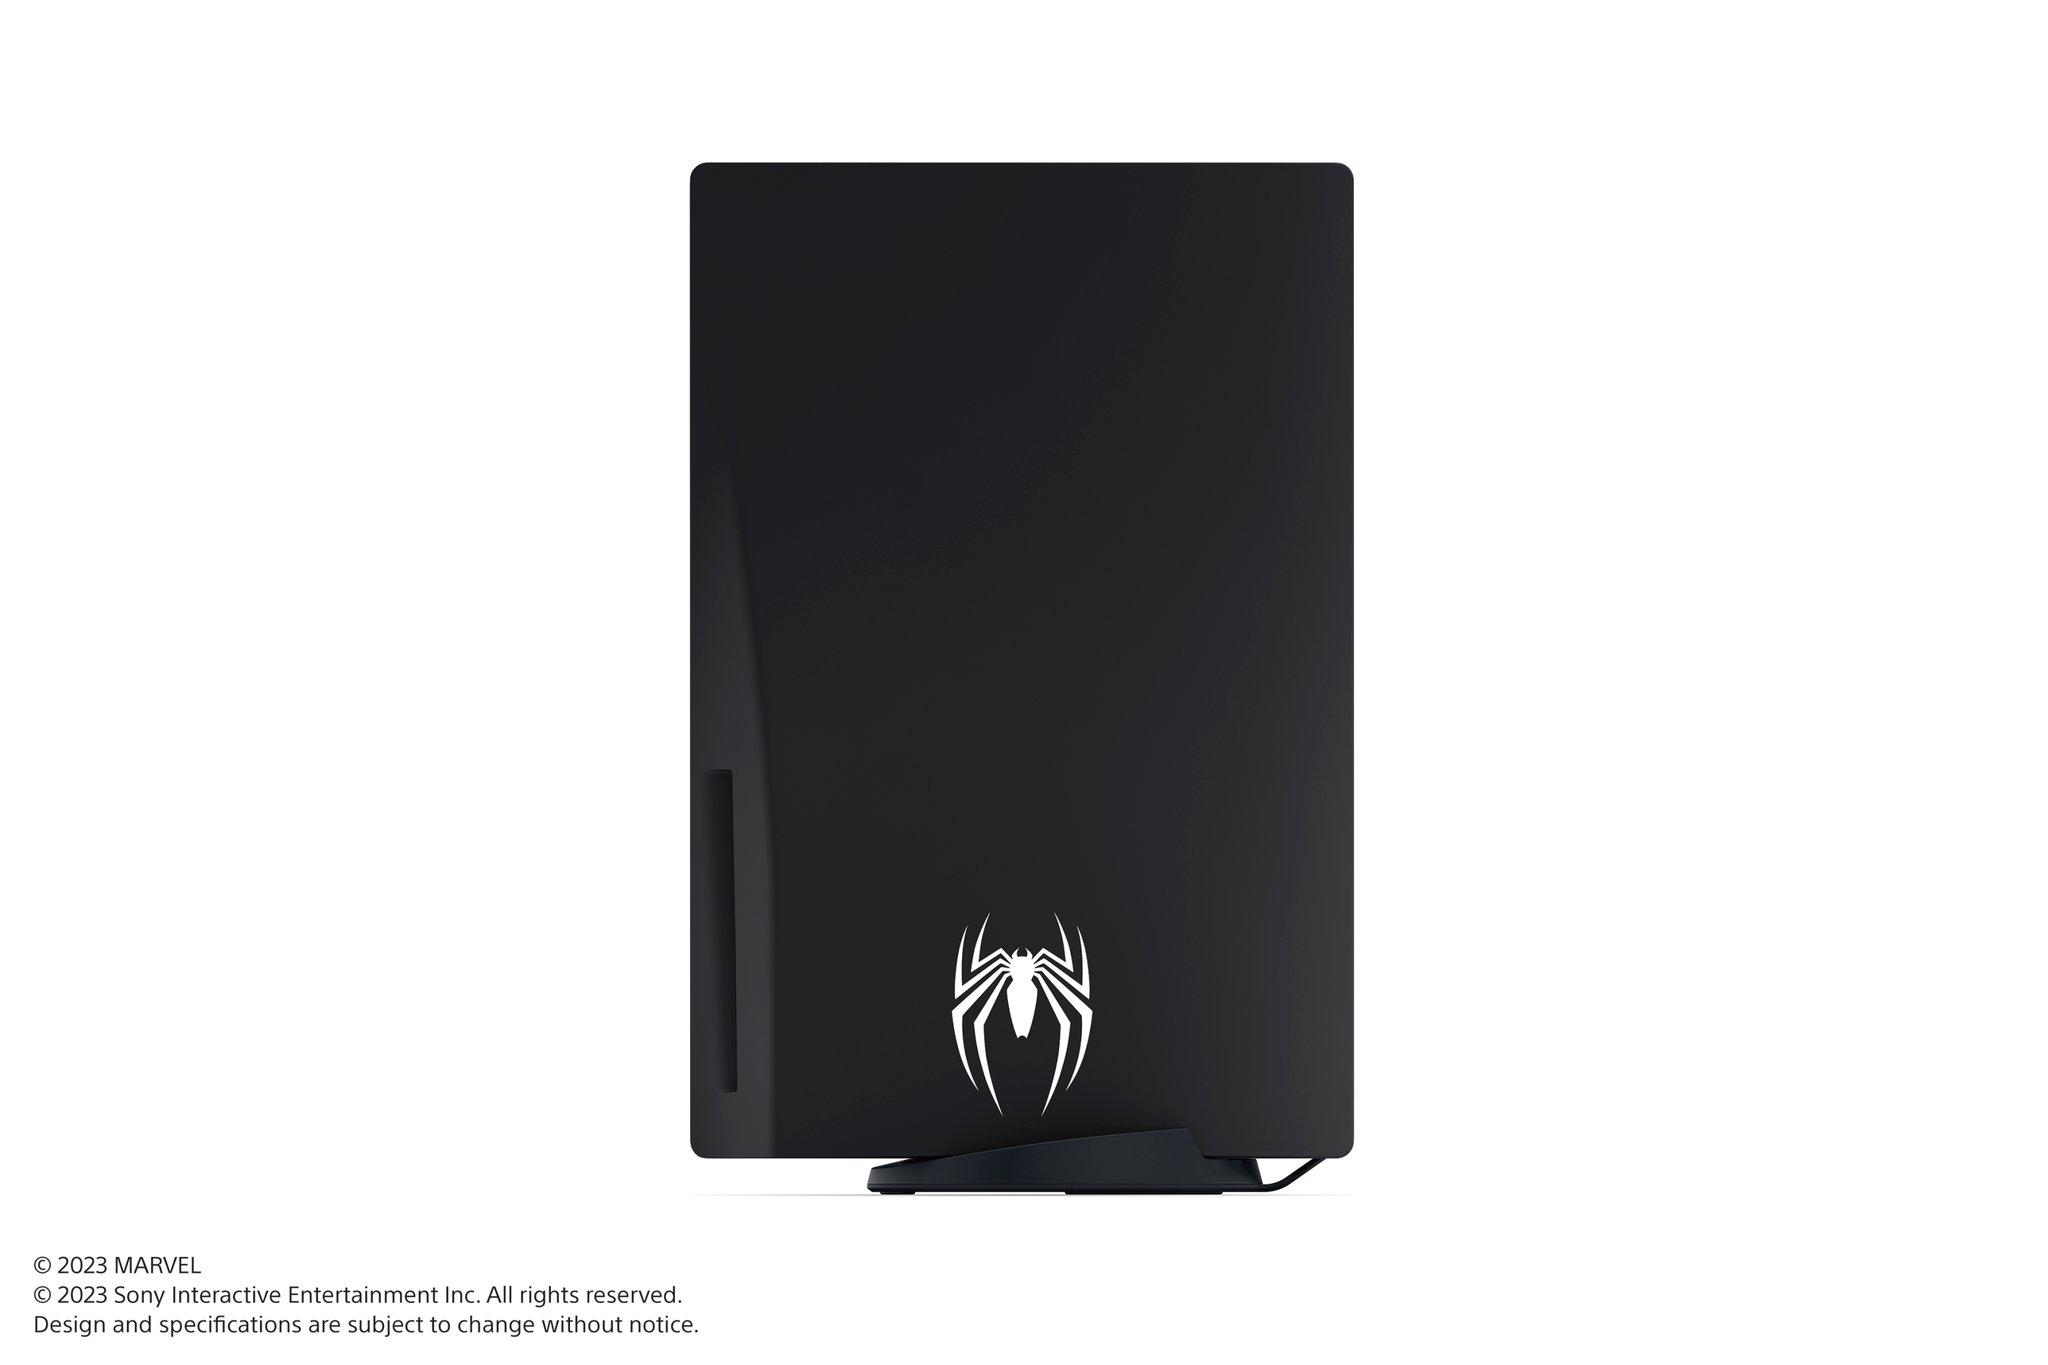  PlayStation 5 Console Covers – Marvel's Spider-Man 2 Limited  Edition (PS5 Disc Only) : Videojuegos